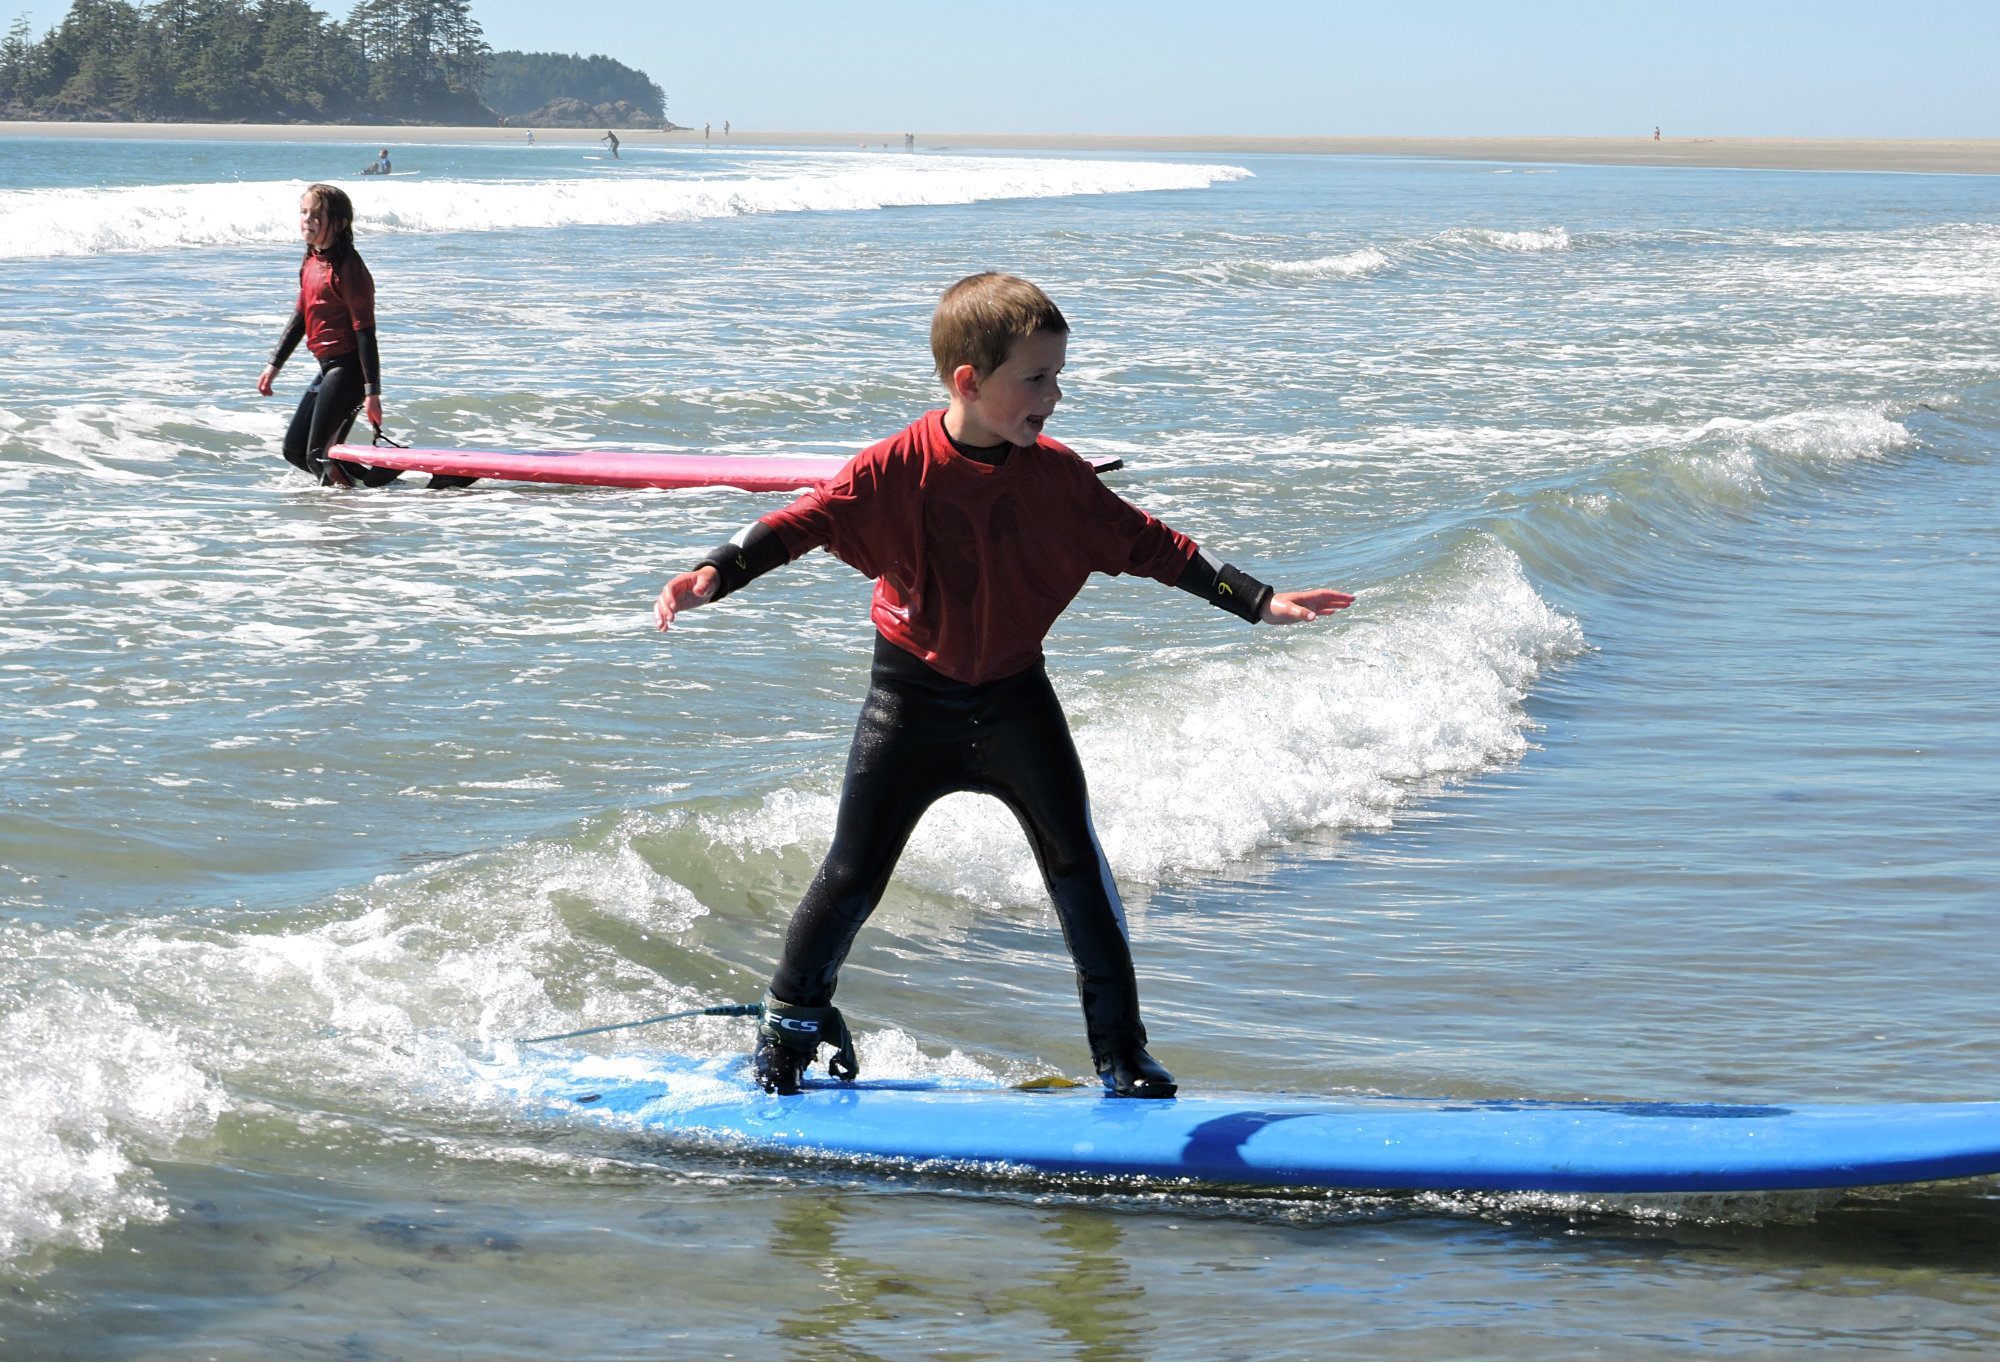 Vancouver Island Family Surf Lessons In Tofino! - Traveling Islanders